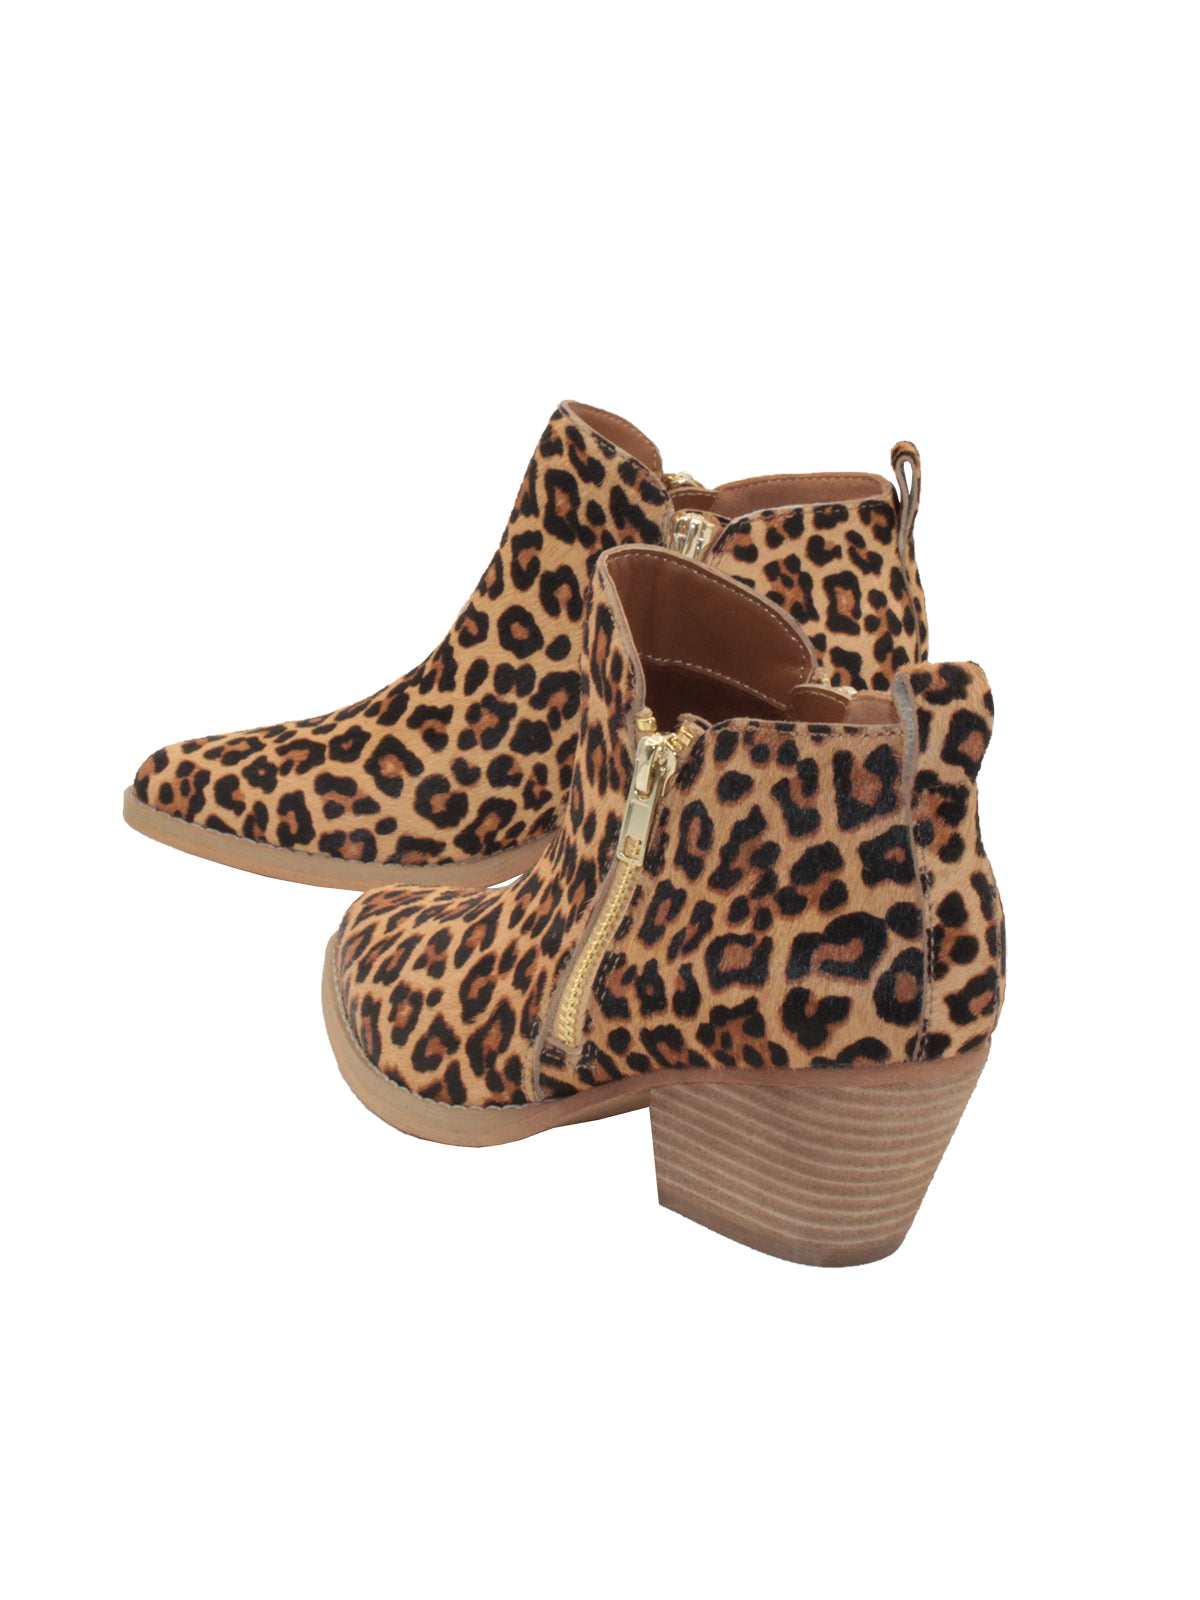 Western inspired Gracemont booties from Very Volatile refresh your wardrobe with on-trend animal print in genuine calf hair. The functioning metal side zippers mean you can slip these on with your favorite pair of jeans and head straight into the weekend.  tan leopard  4